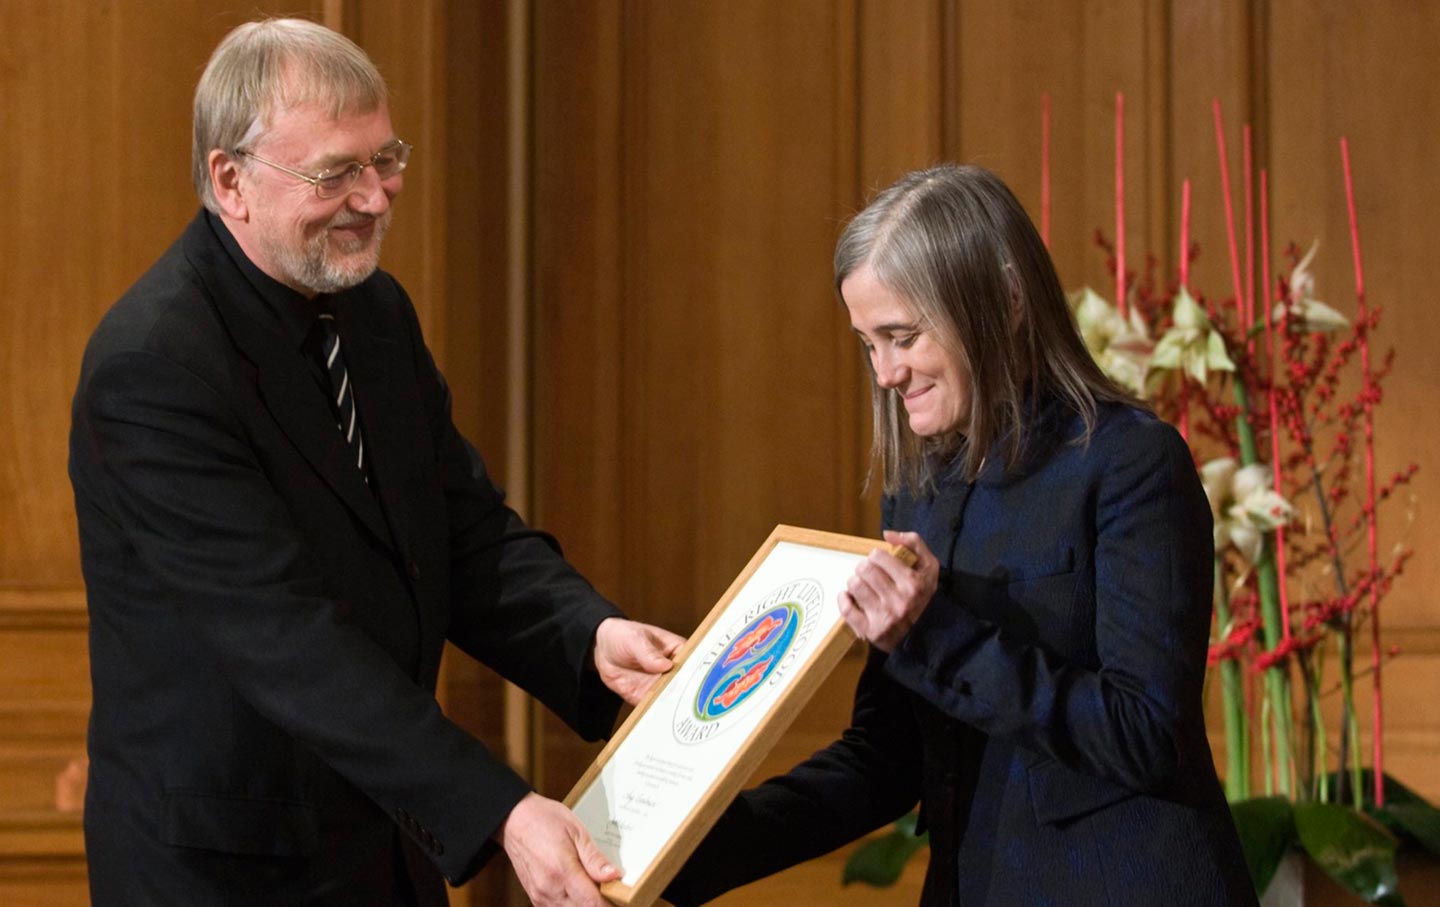 North Dakota Wants to Arrest Democracy Now!’s Amy Goodman for Engaging in Journalism